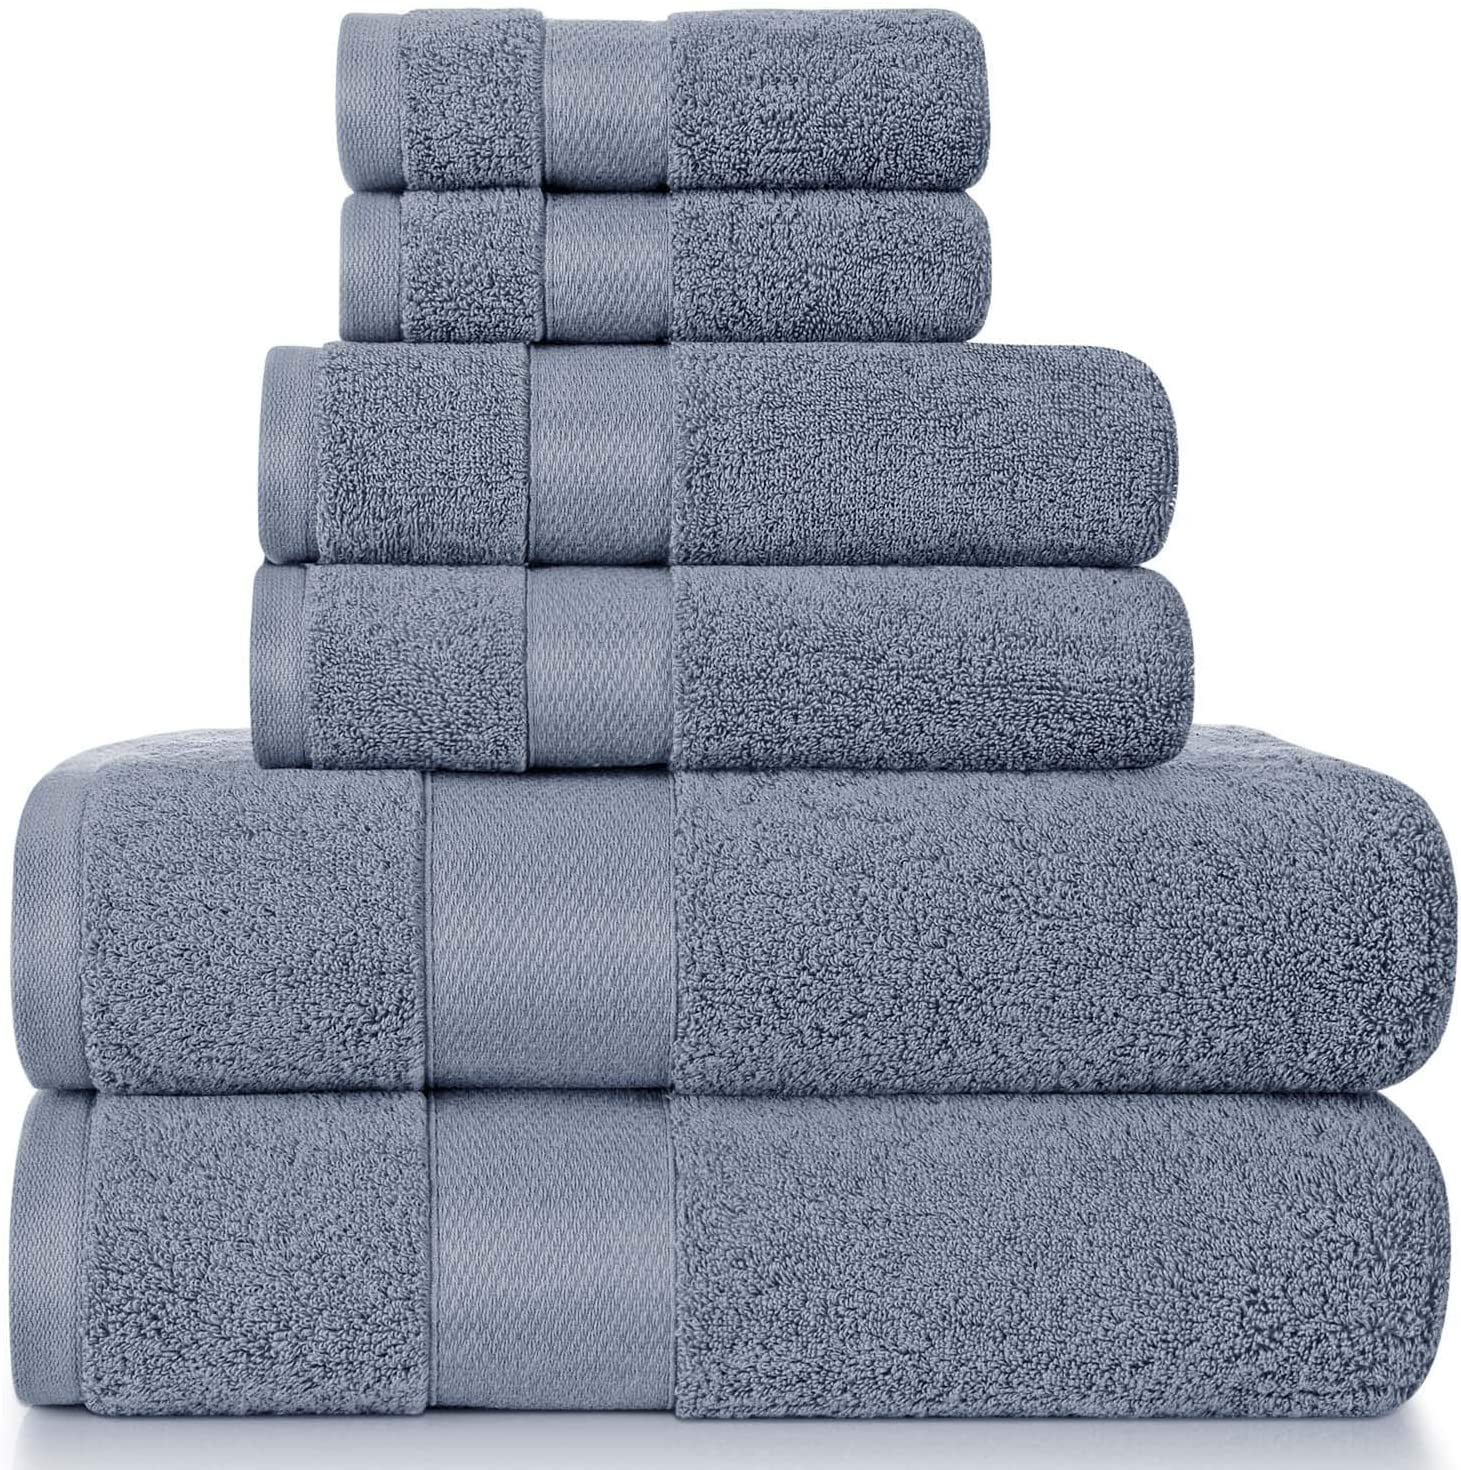 27 x 54 Inches, Turquoise Blue 4 Pieces Bath Towel 600 GSM Combed Cotton Bath Towel Sets Luxury Towels for Bathroom Soft Absorbent Towels